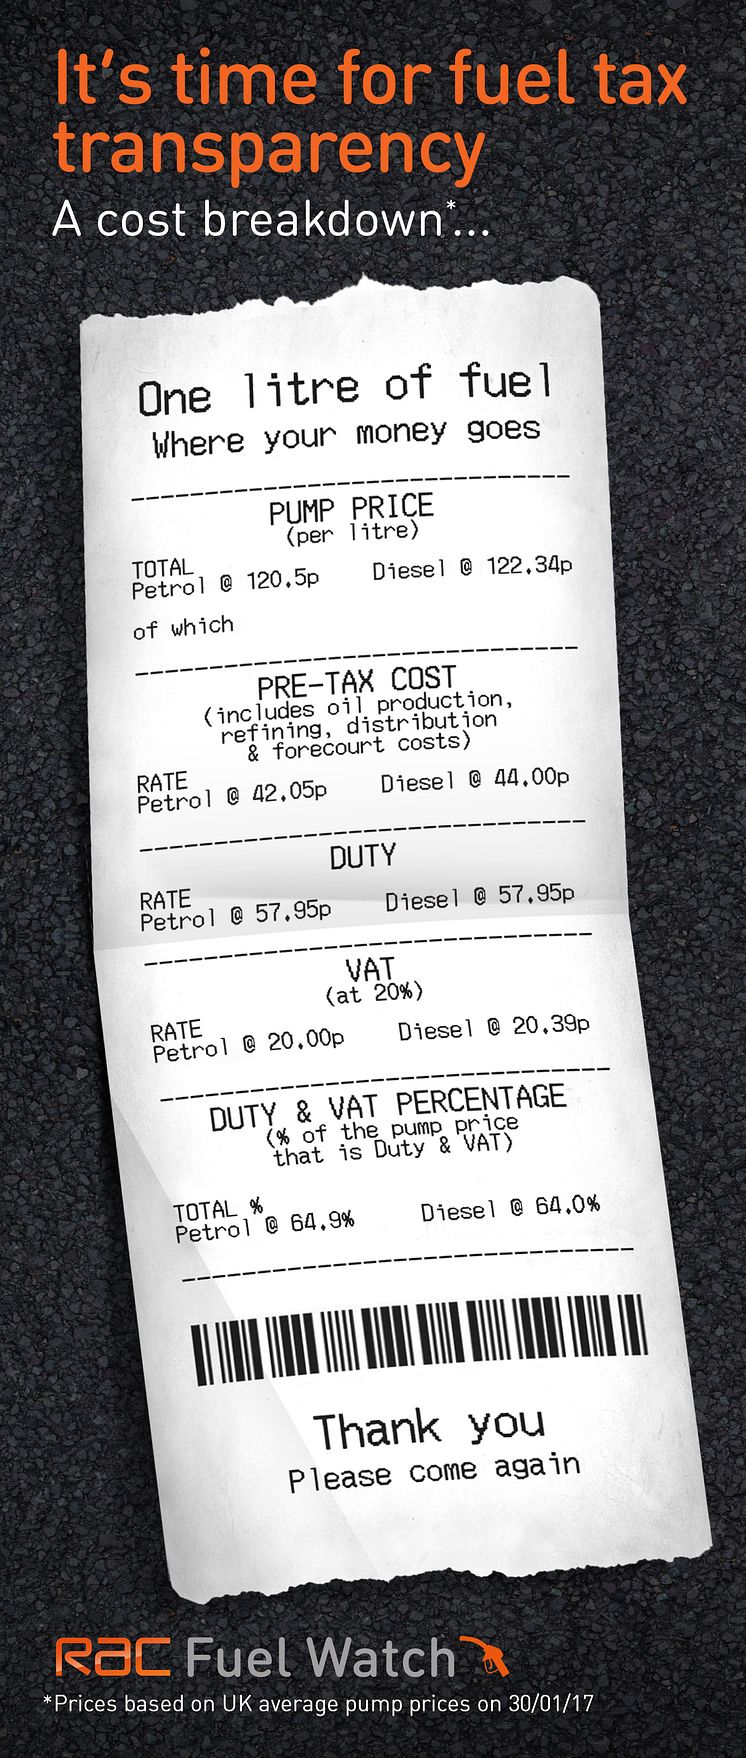 It's time for fuel tax transparency - how your fuel receipt should look